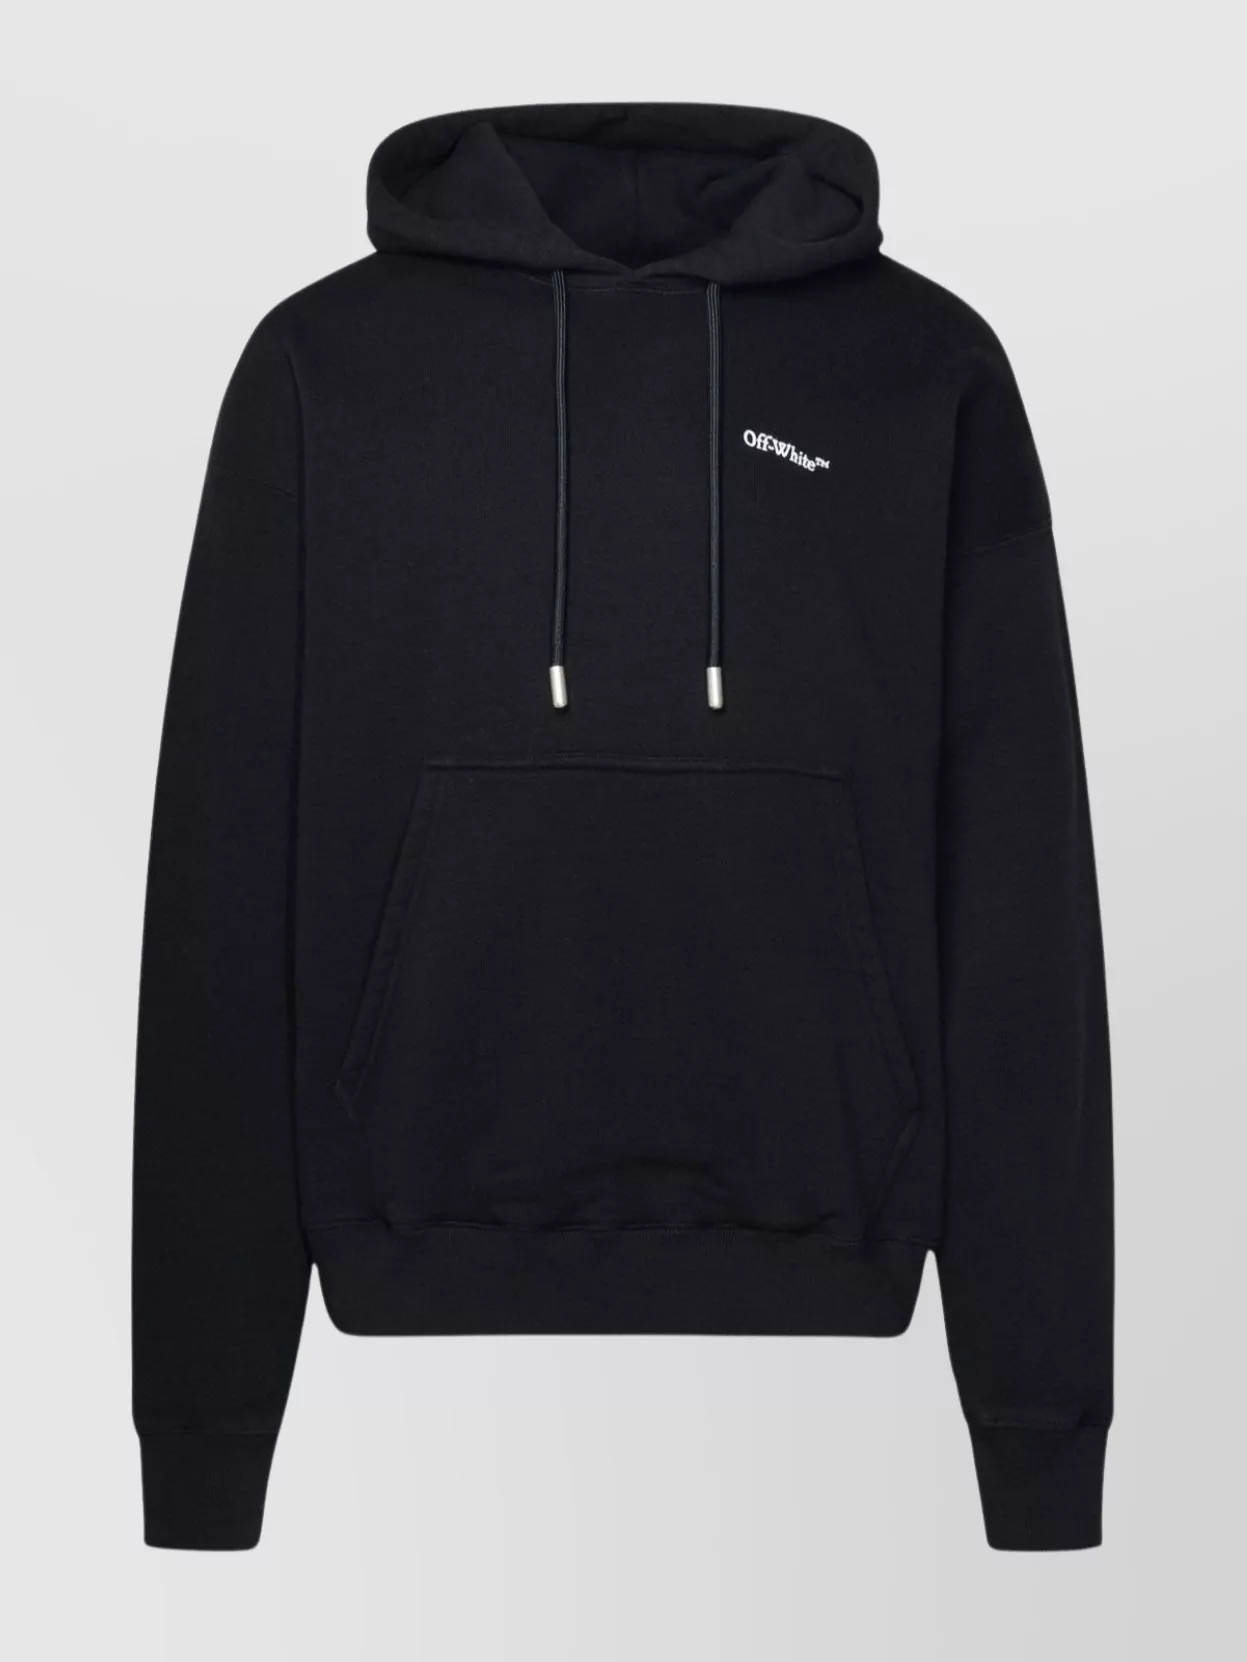 Off-white Cotton Sweatshirt With Hood And Pouch Pocket